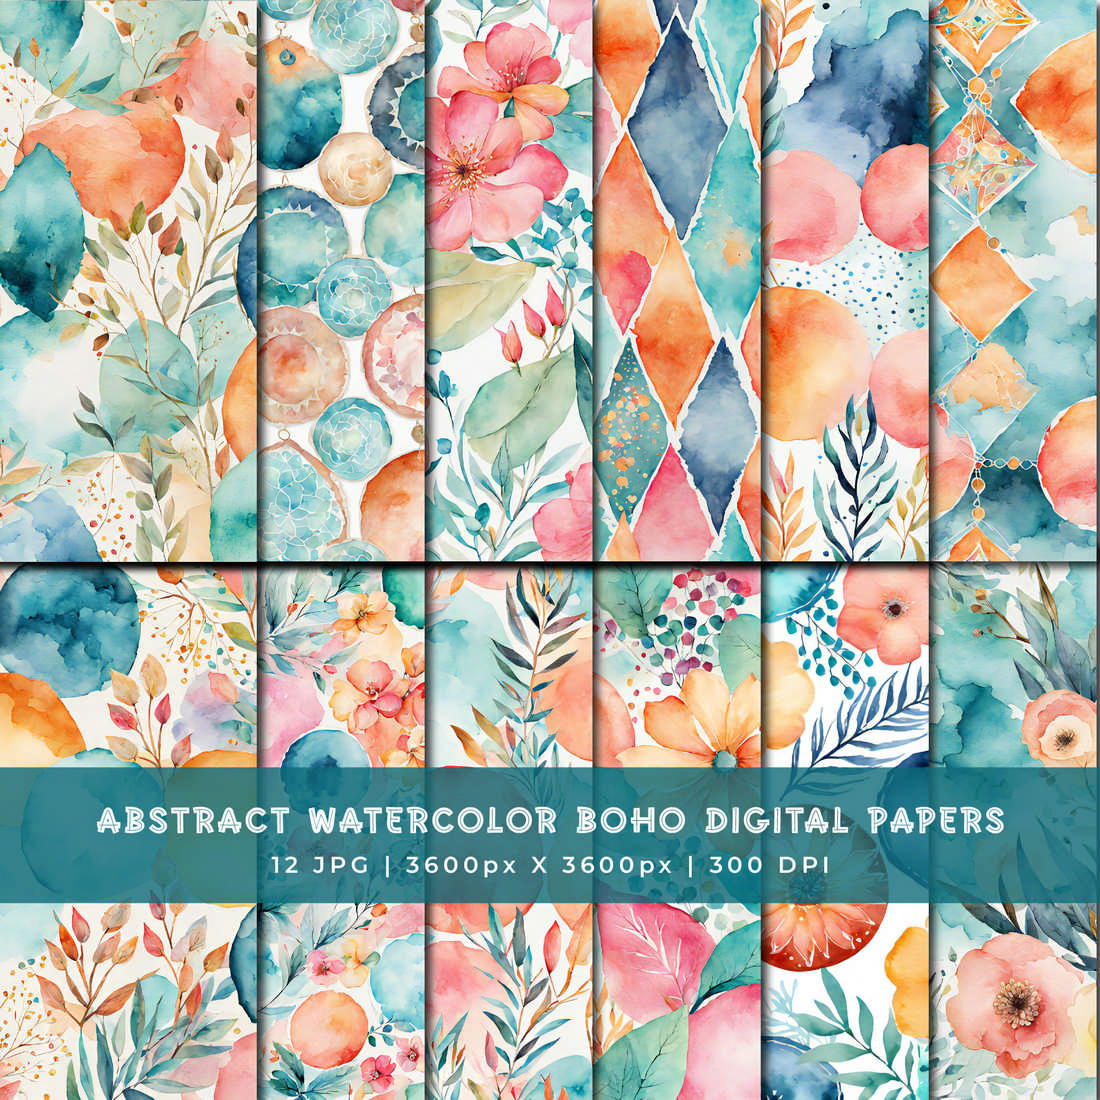 Abstract Watercolor Boho Digital Paper cover image.